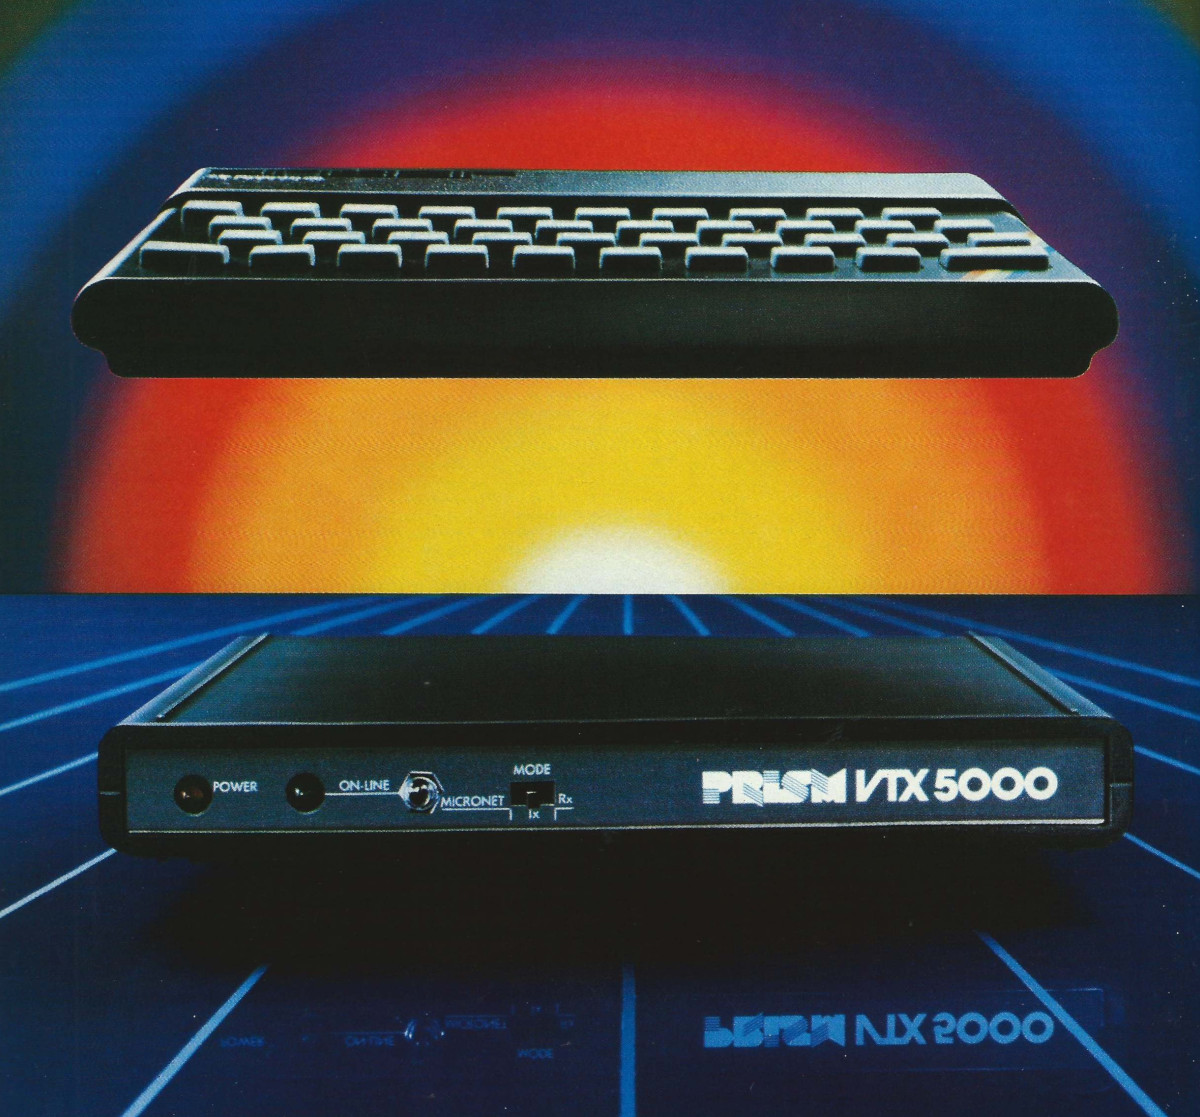 Prism's VTX5000, custom-designed for the Sinclair Spectrum. From Personal Computer News, 1st September 1983